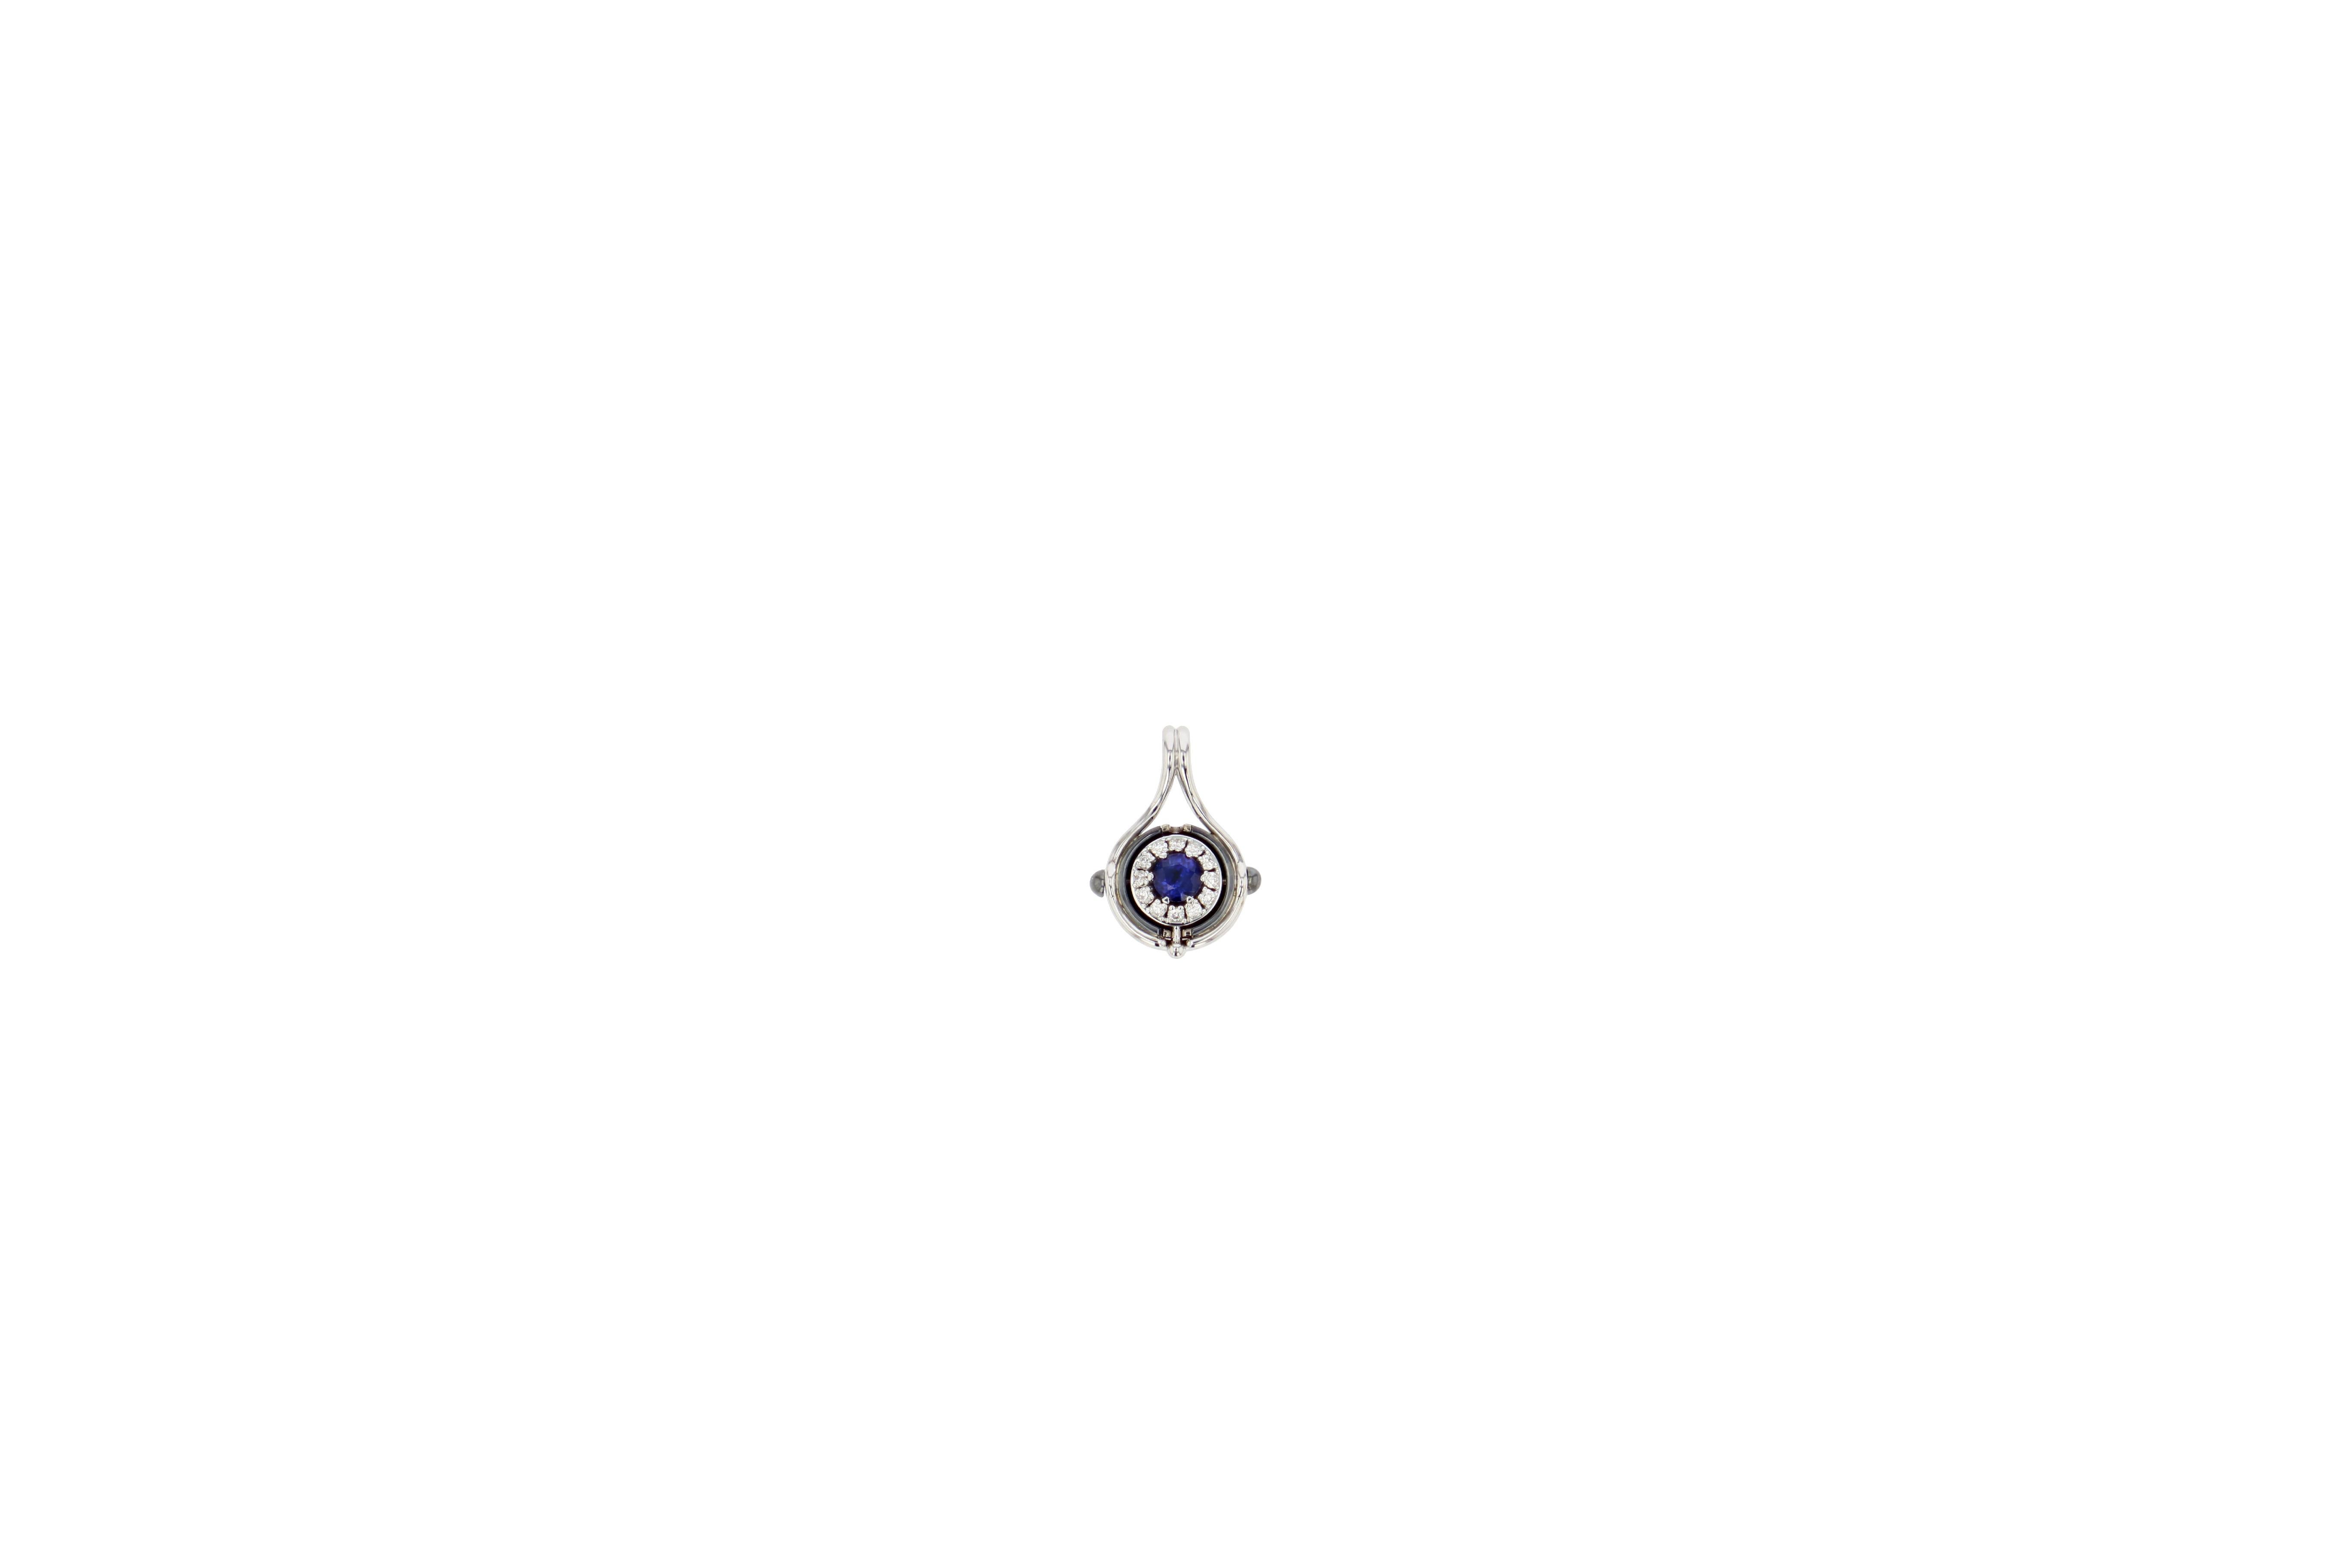 Neoclassical Blue Sapphire Diamonds Mira Pendant Necklace in 18k White Gold by Elie Top